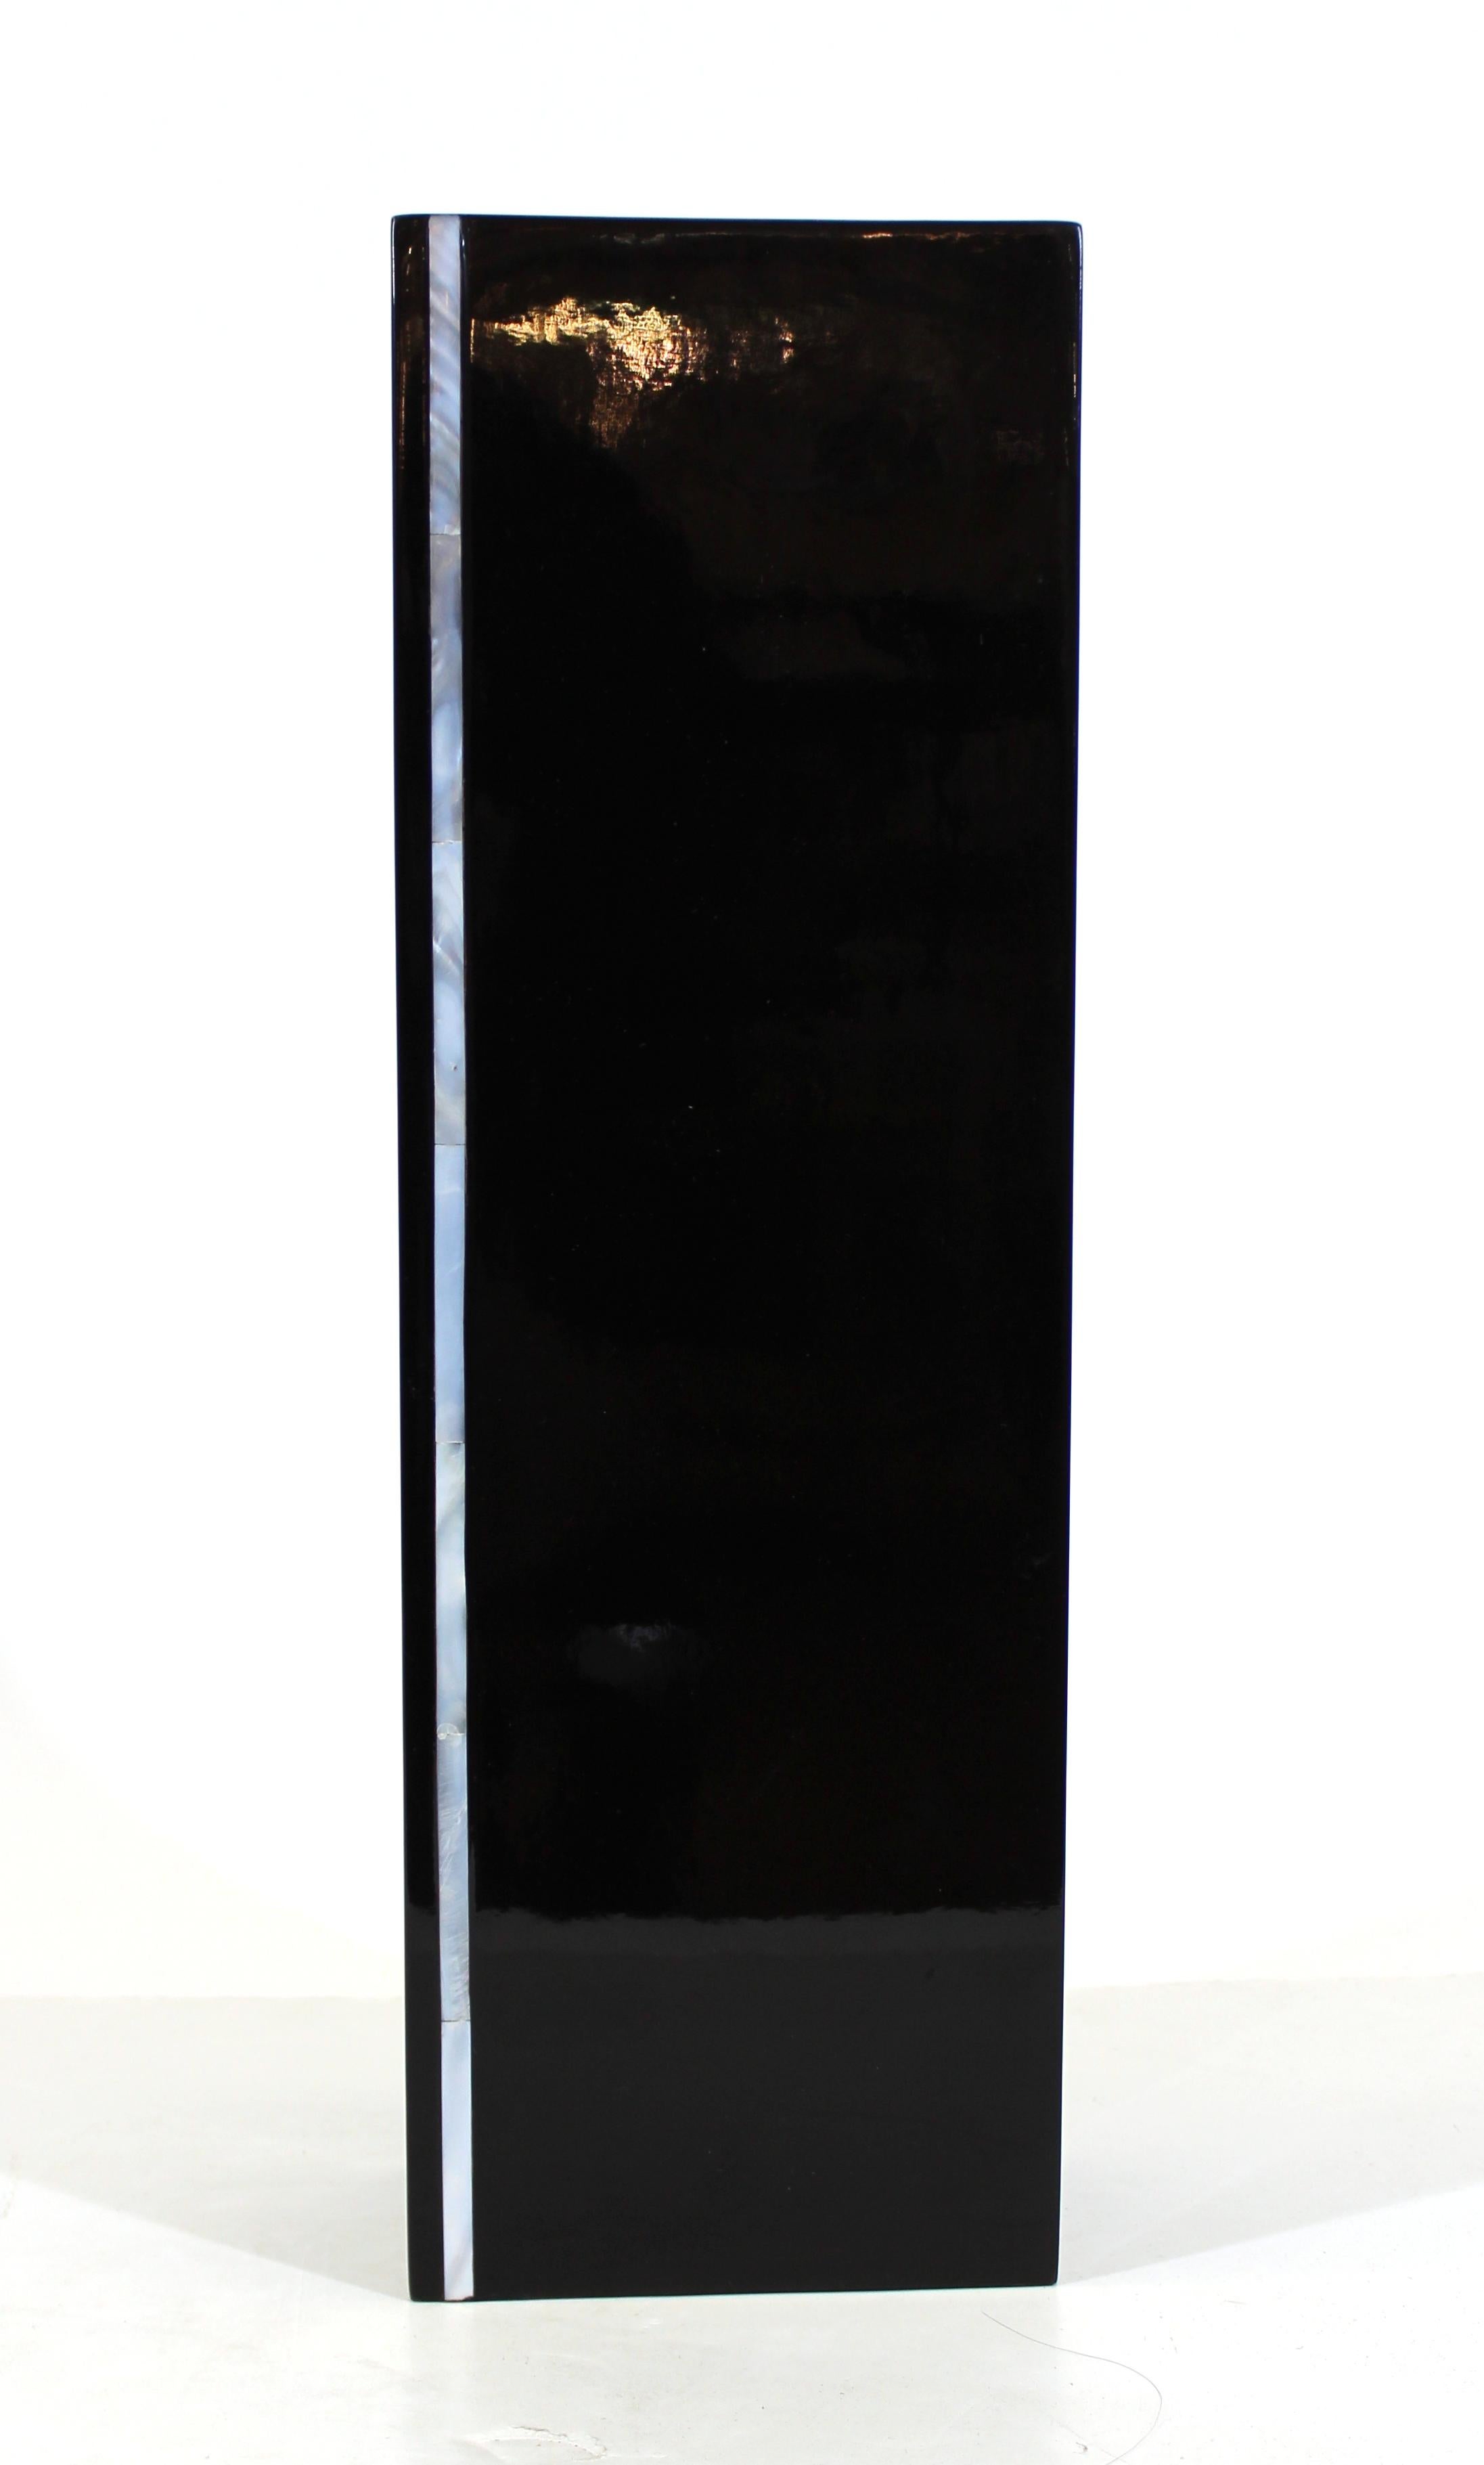 Calvin Klein modern black lacquer rectangular vase with mother-of-pearl inlay on the front, marked on the bottom.